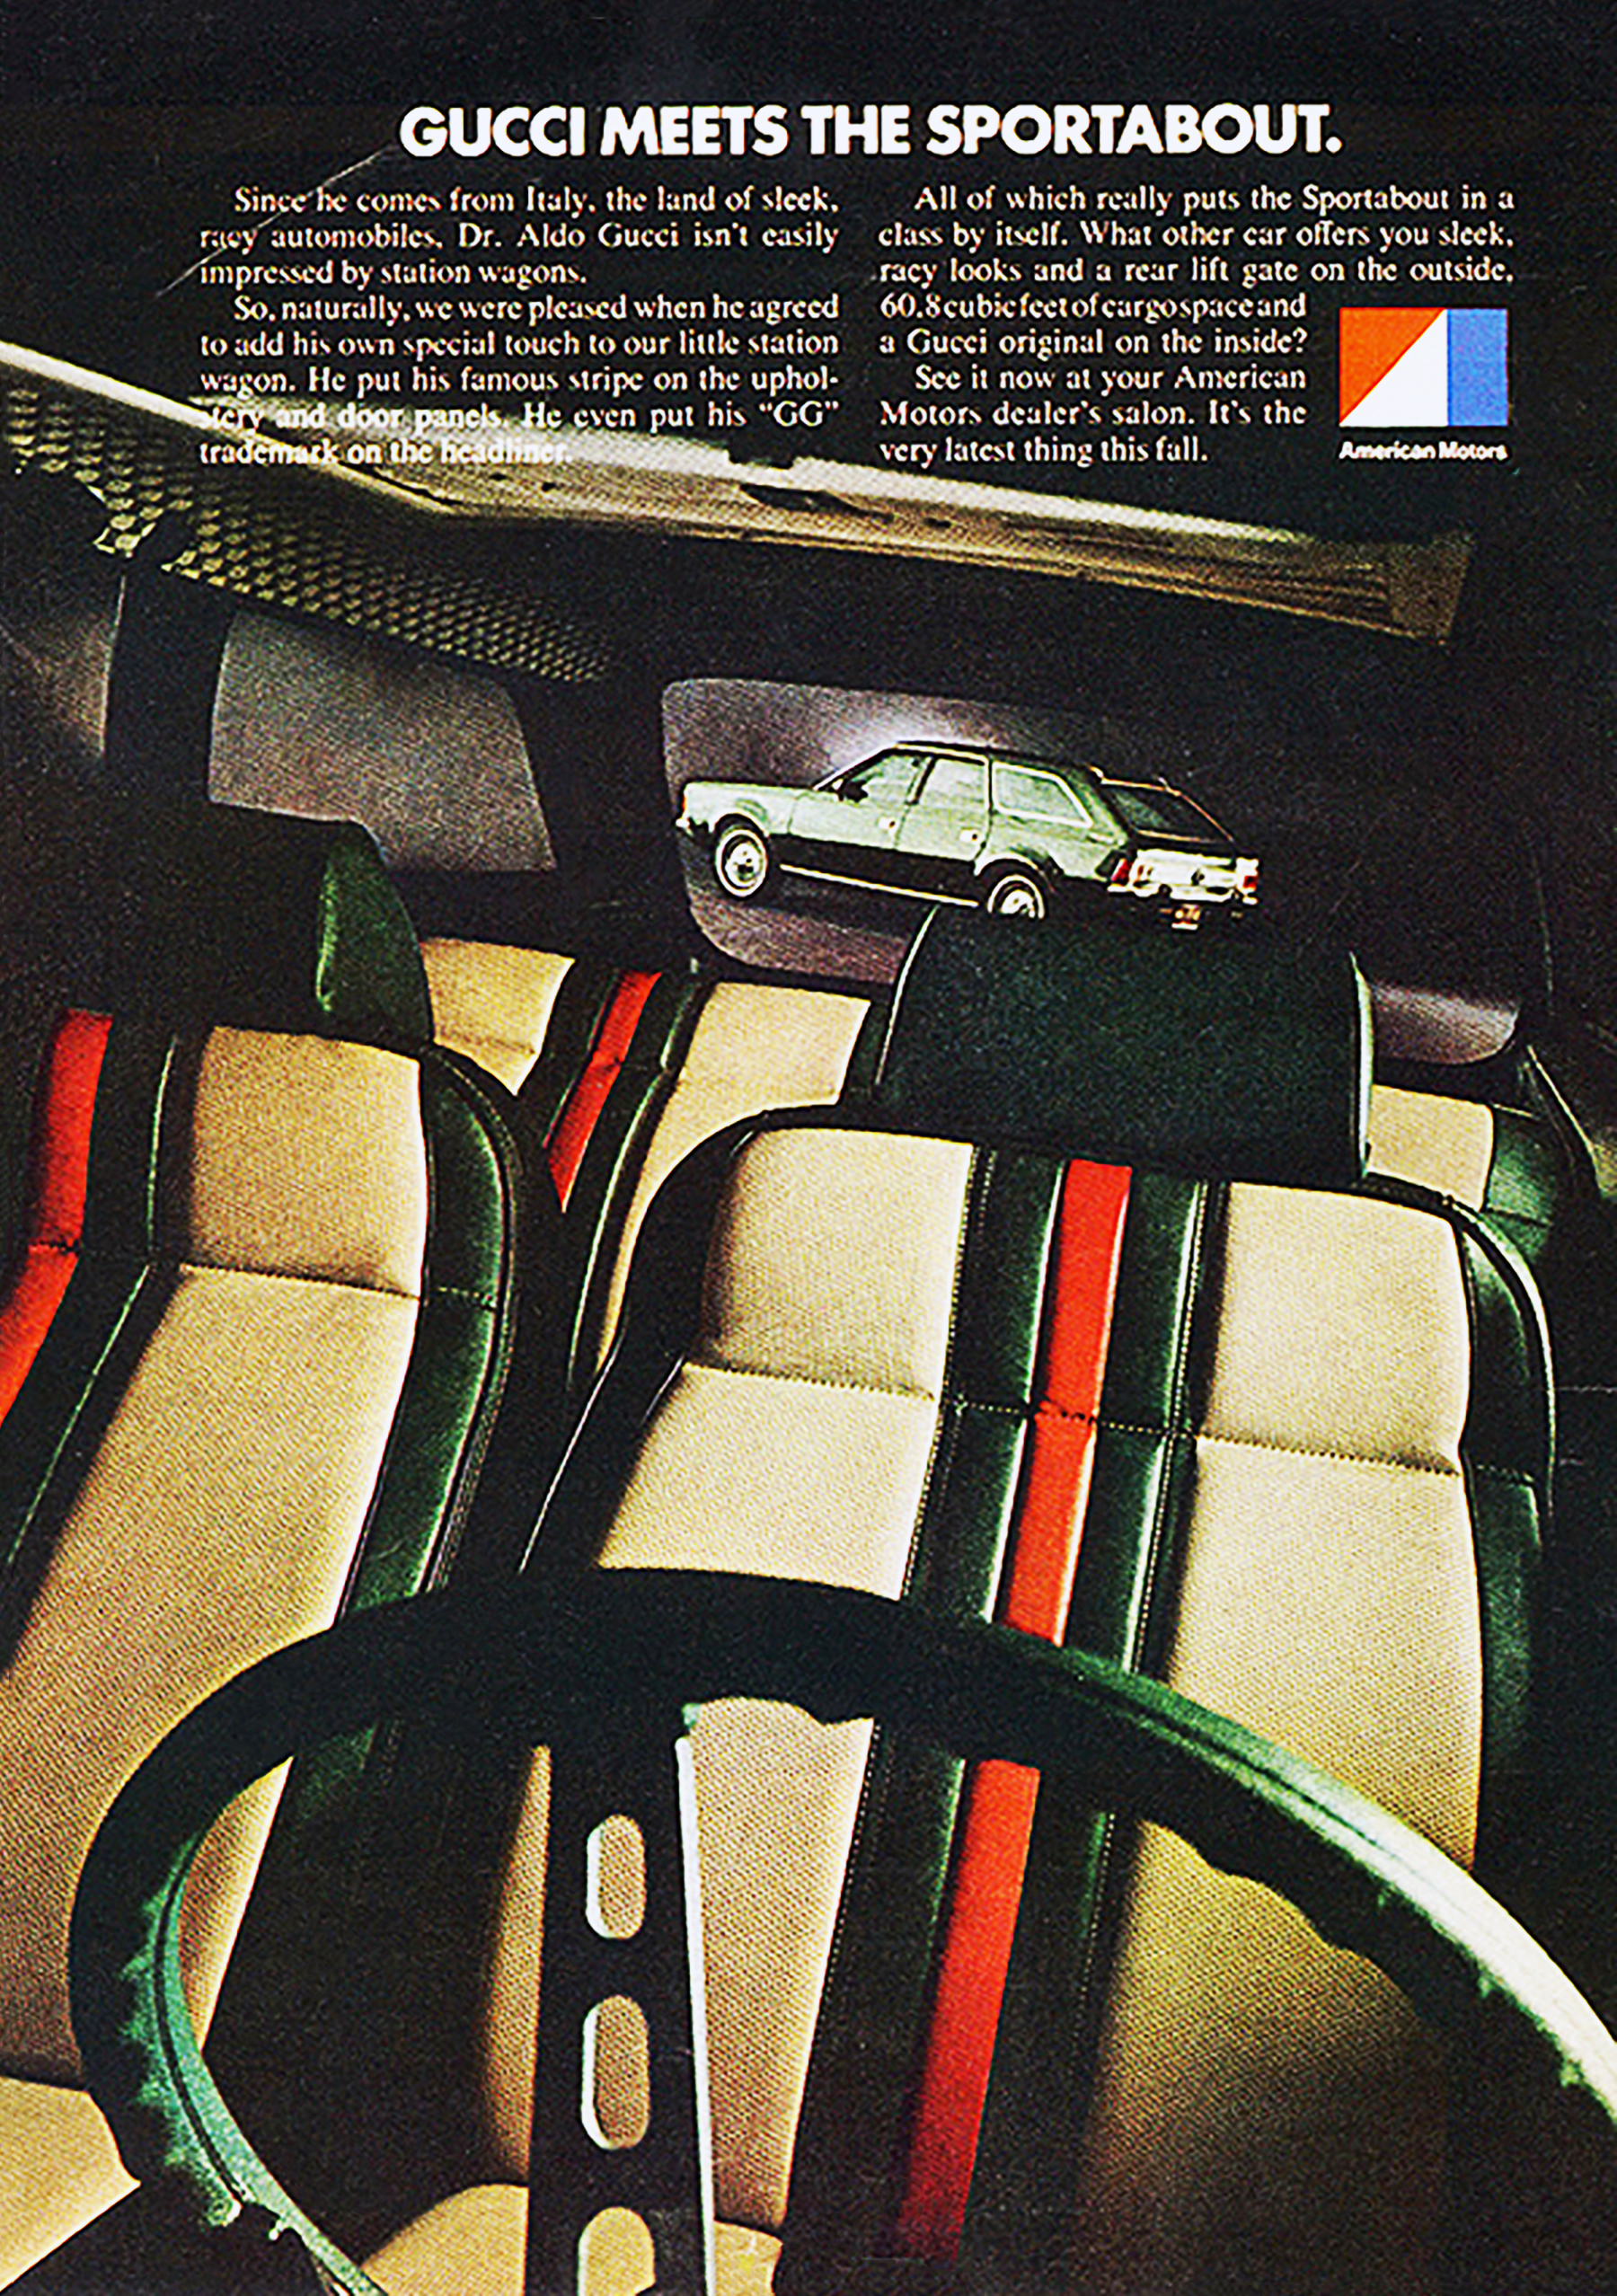 automatisk kantsten Sydamerika 1972 AMC Hornet Sportabout Gucci Edition - The Daily Drive | Consumer  Guide® The Daily Drive | Consumer Guide®